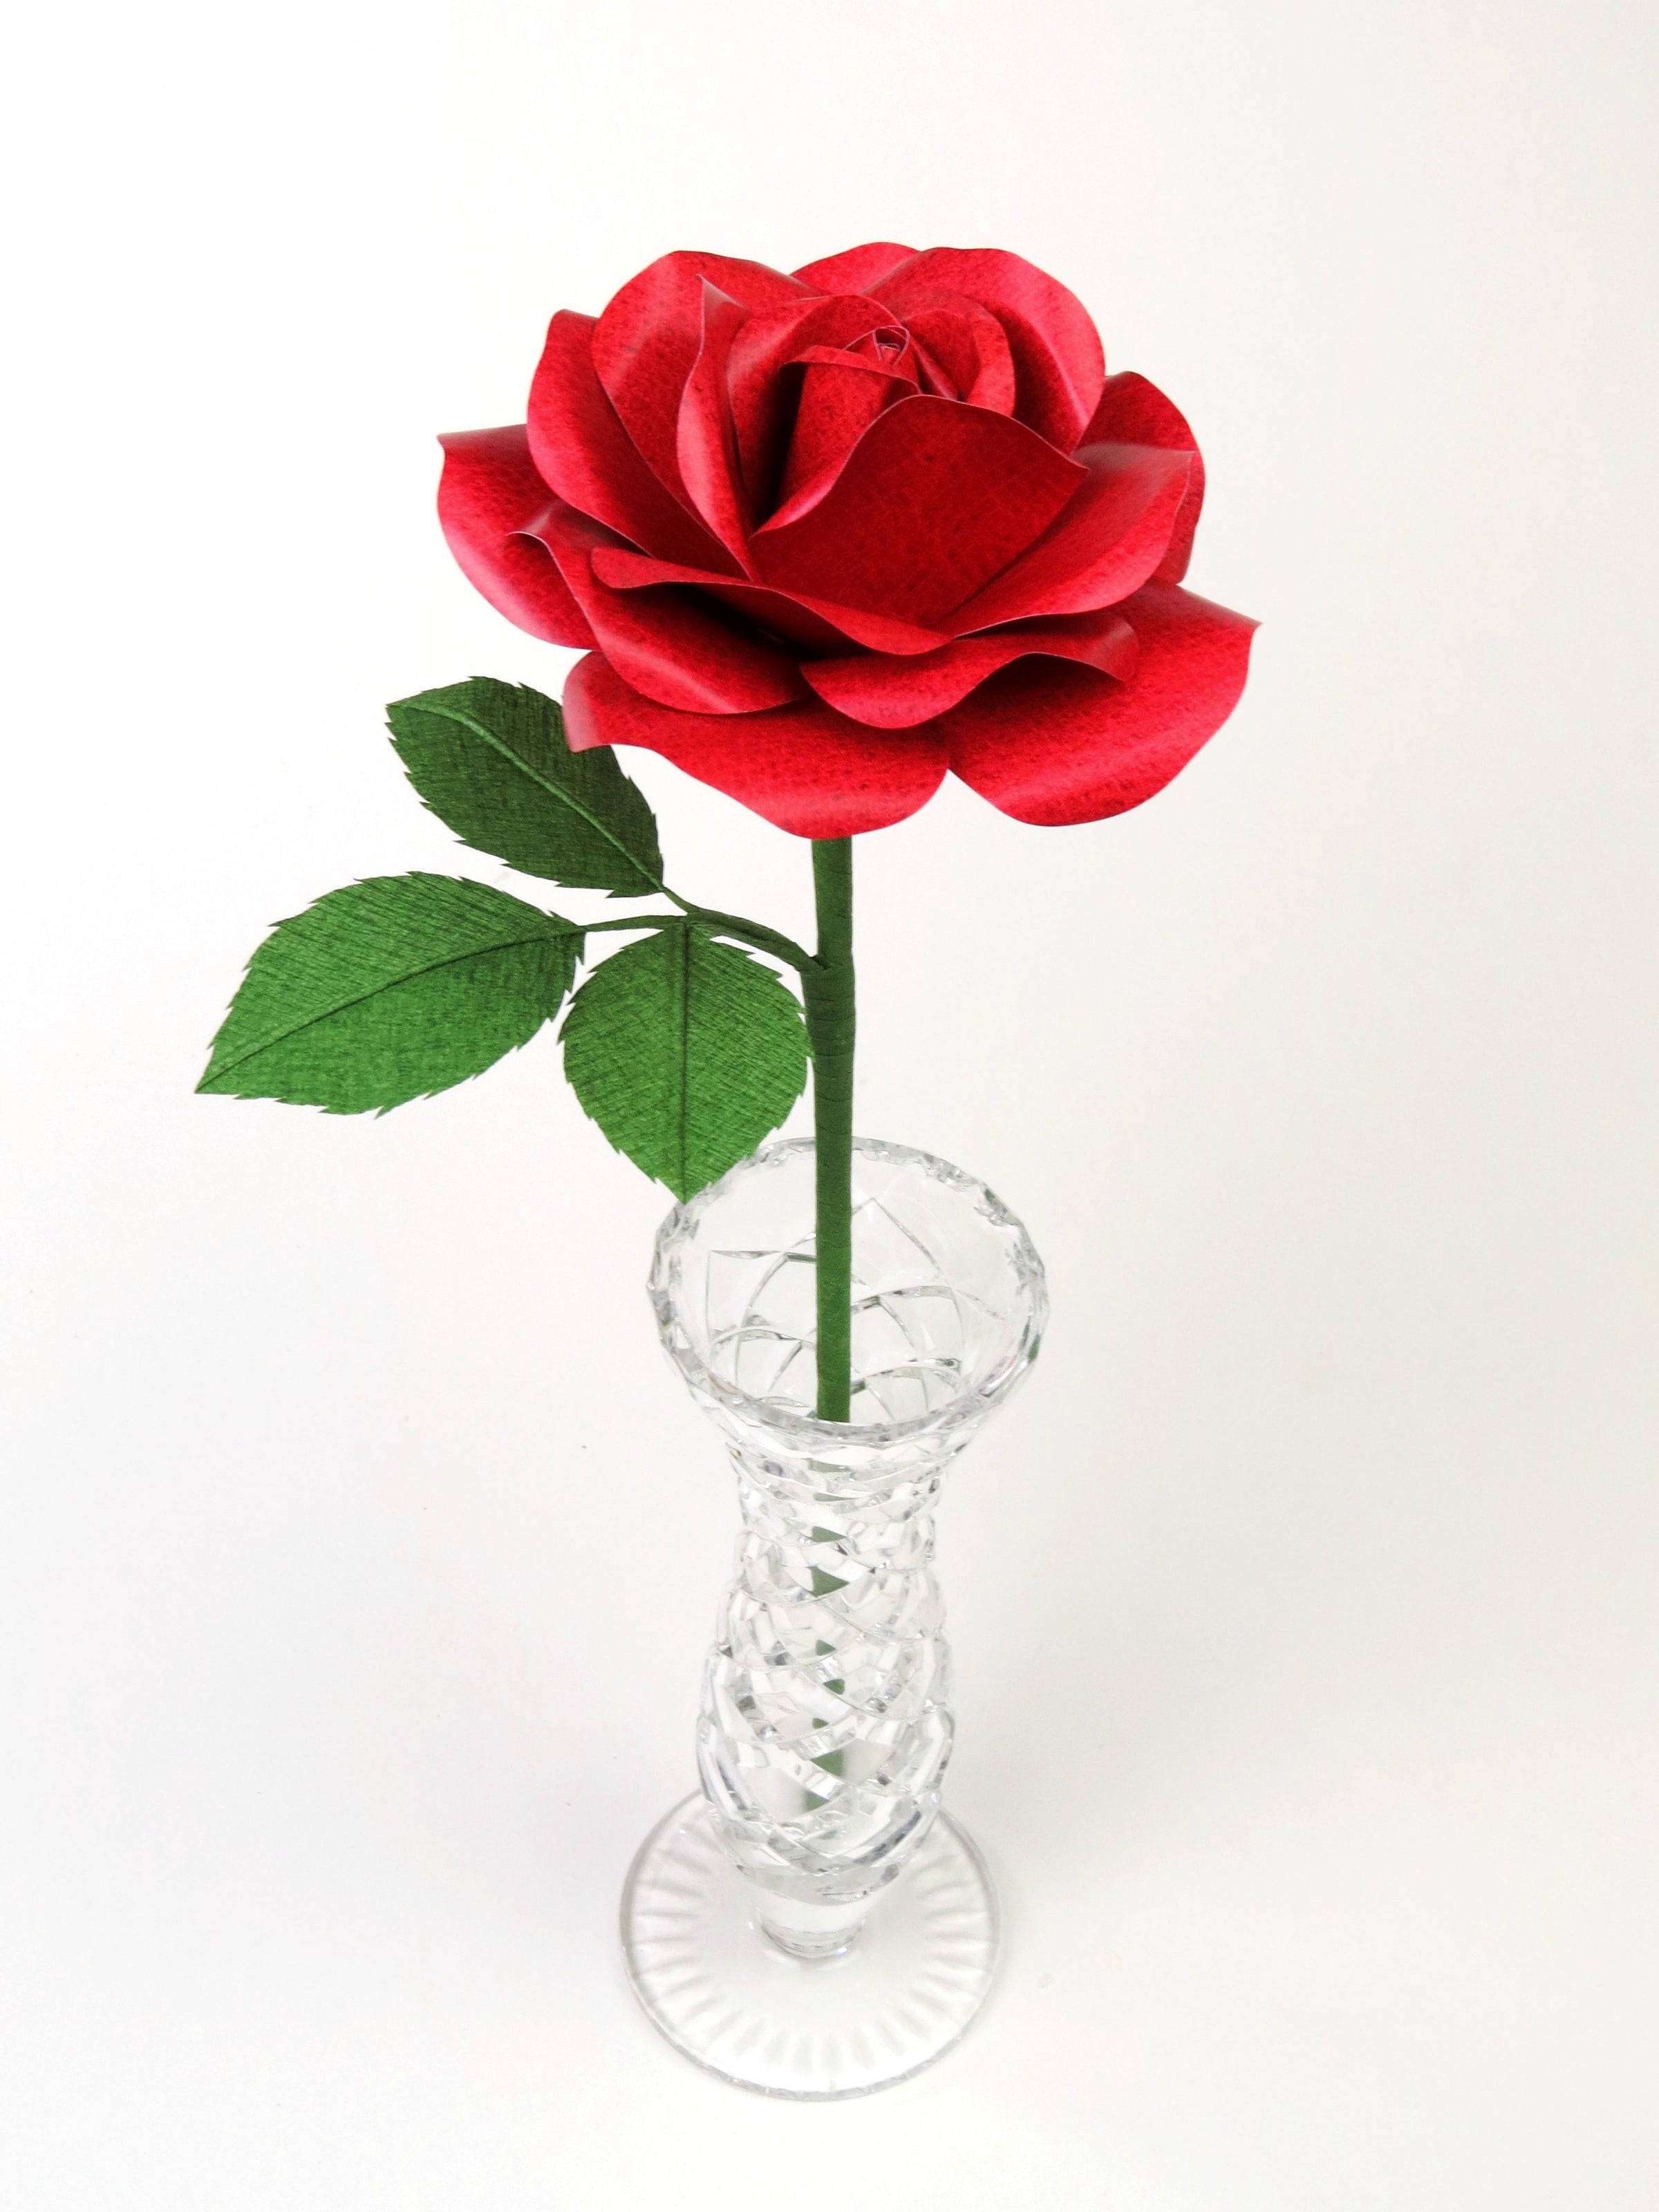 Red leather grain paper rose with three leaves standing in a narrow glass vase against a grey backdrop